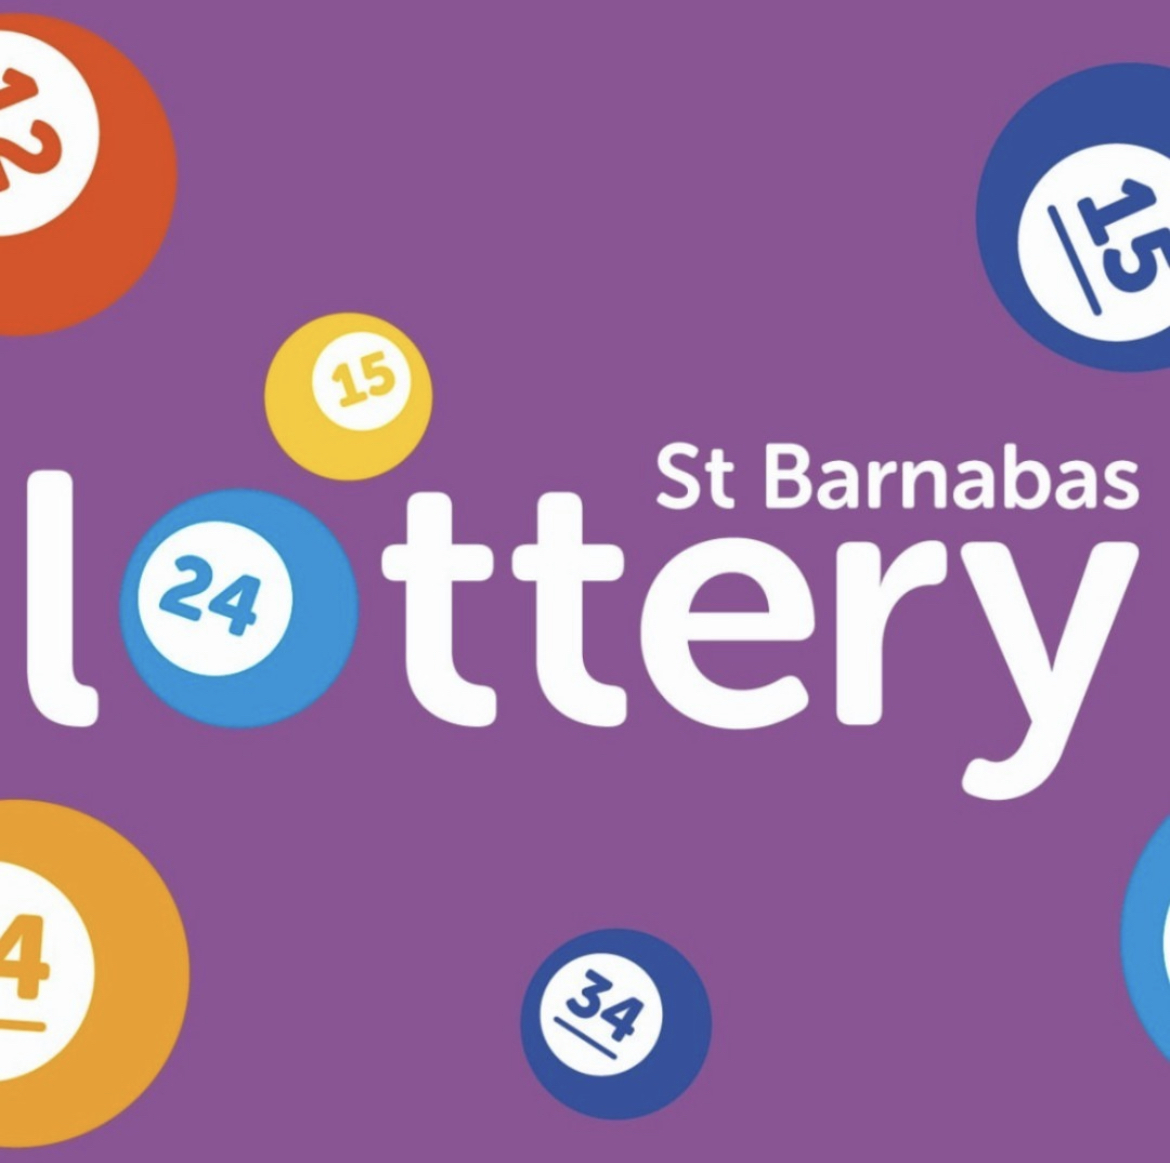 Congratulations to today's Lottery winners, including Mrs B, from Nettleham who won the £1000 jackpot 🎉 

Next week's rollover is a whopping £7000, so join the excitement & support local hospice care with the St. Barnabas Lottery 💜

stbarnabashospice.co.uk/lottery/

Players must be 18+